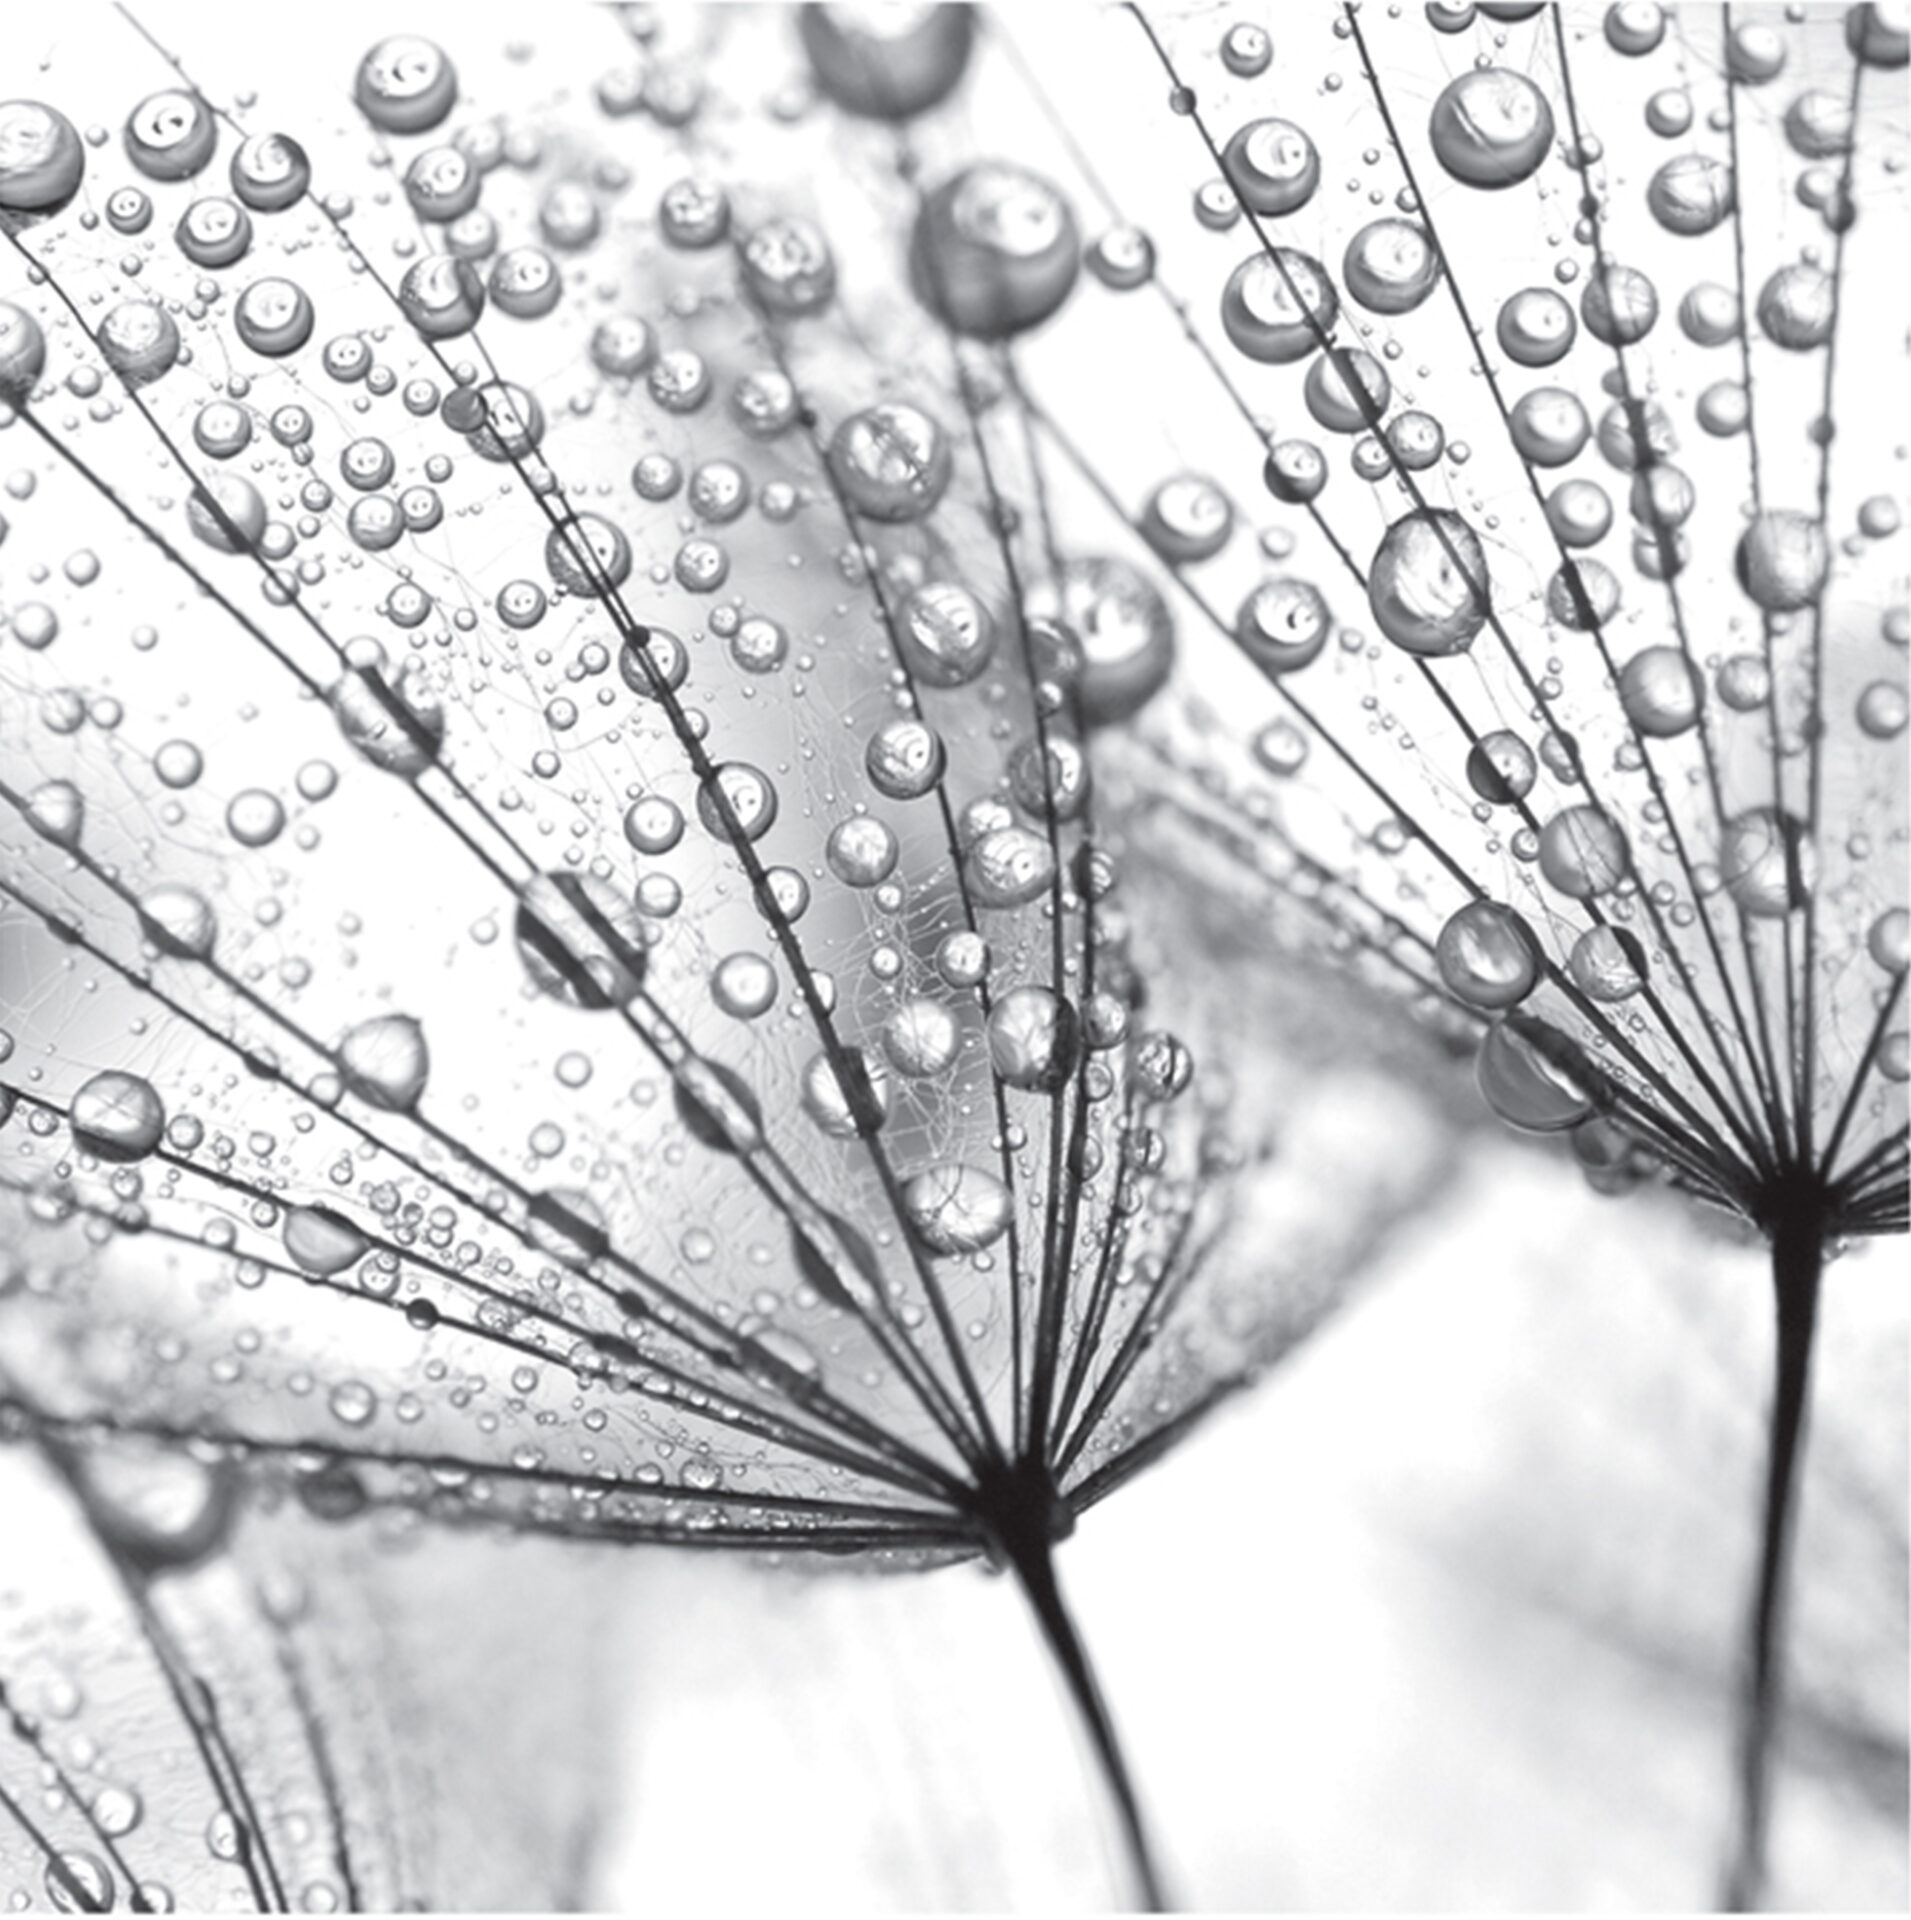 A black and white photo of flowers with dew